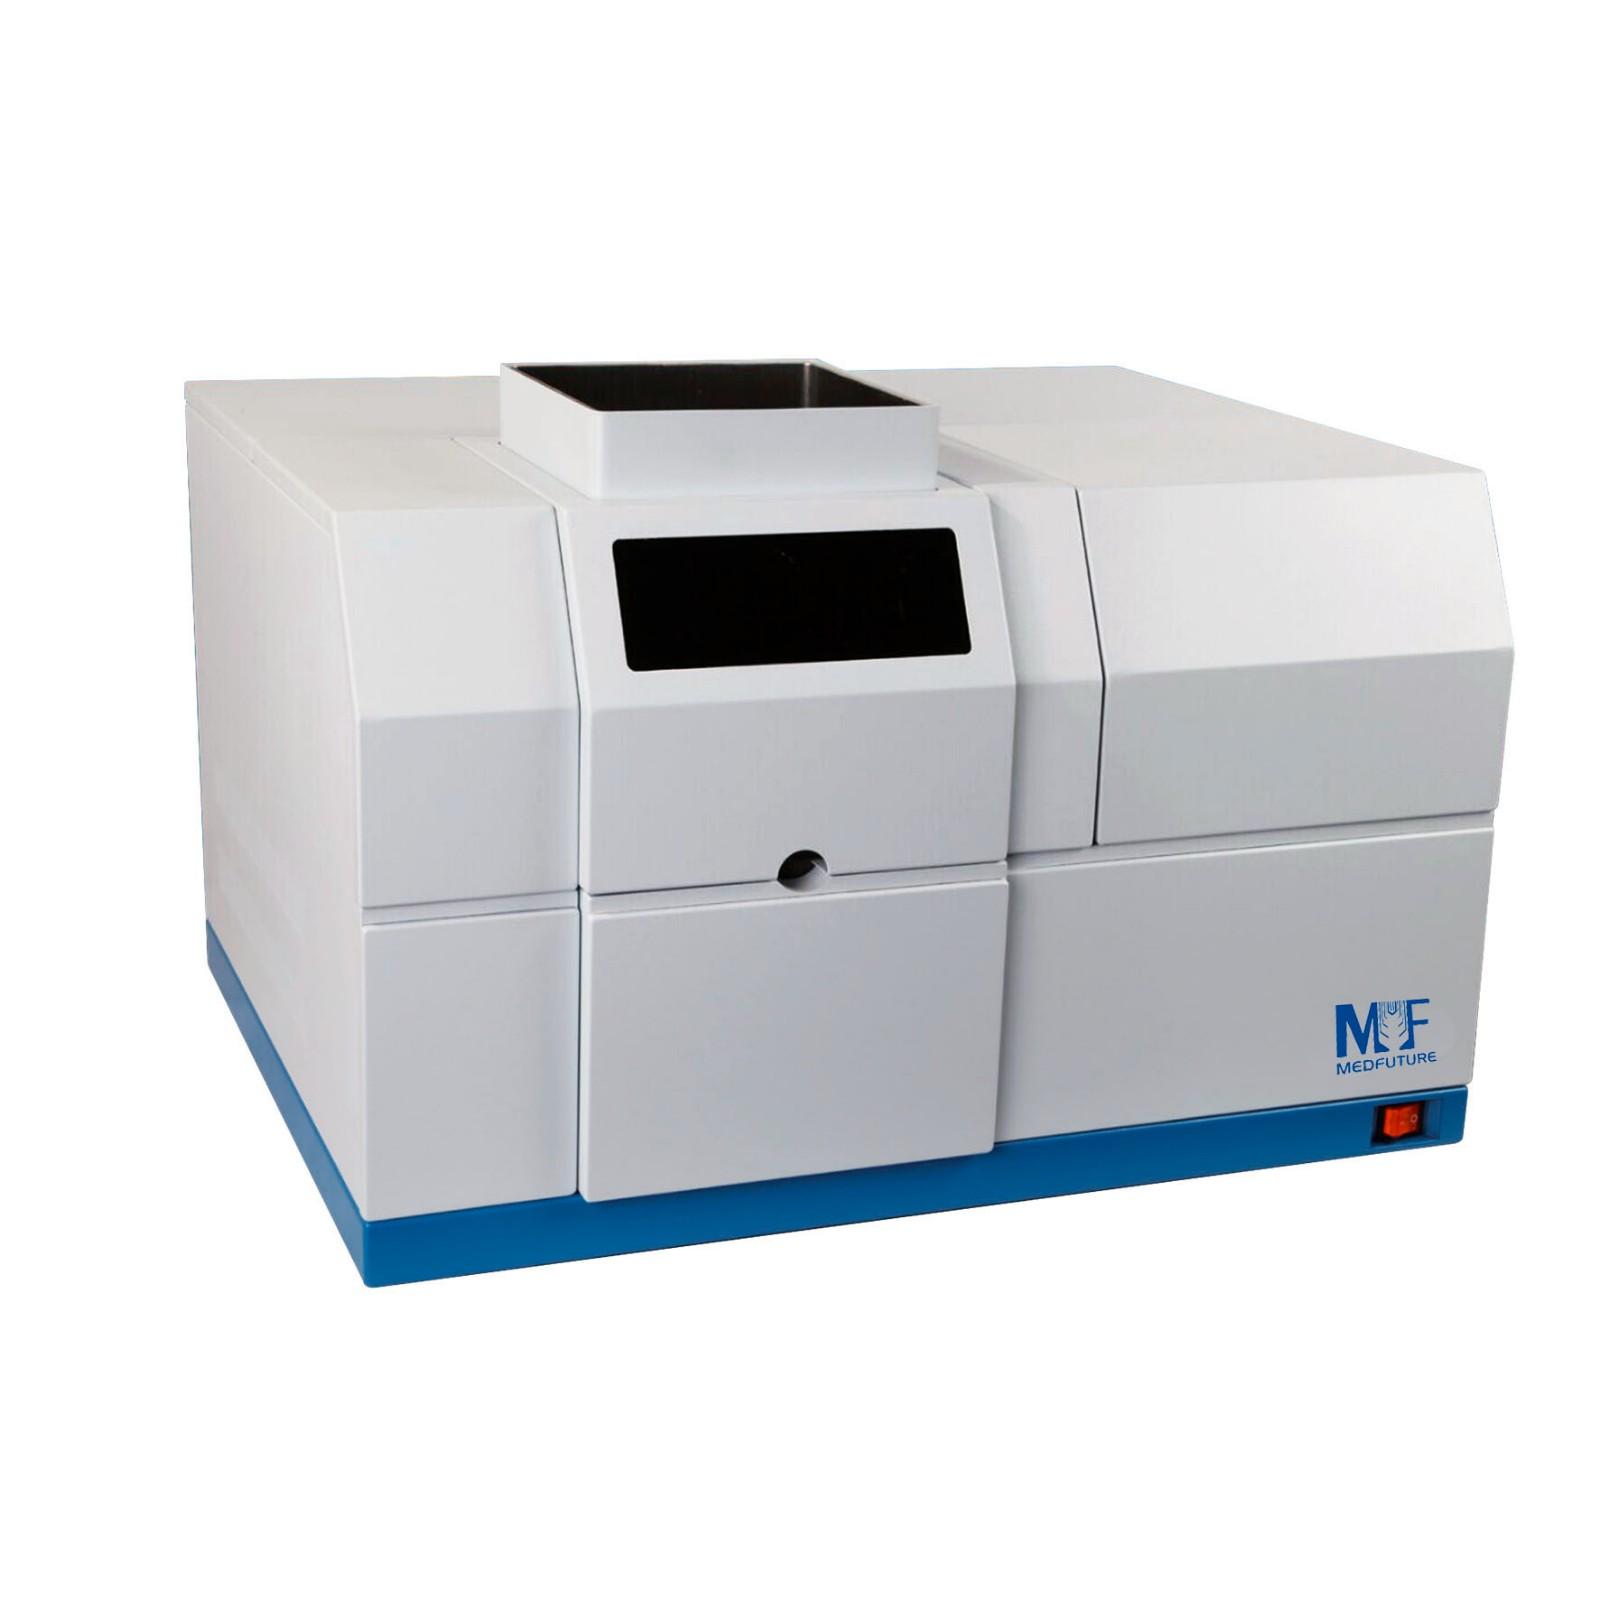 FAAS-4530 Atomic Absorption Spectrophotometer